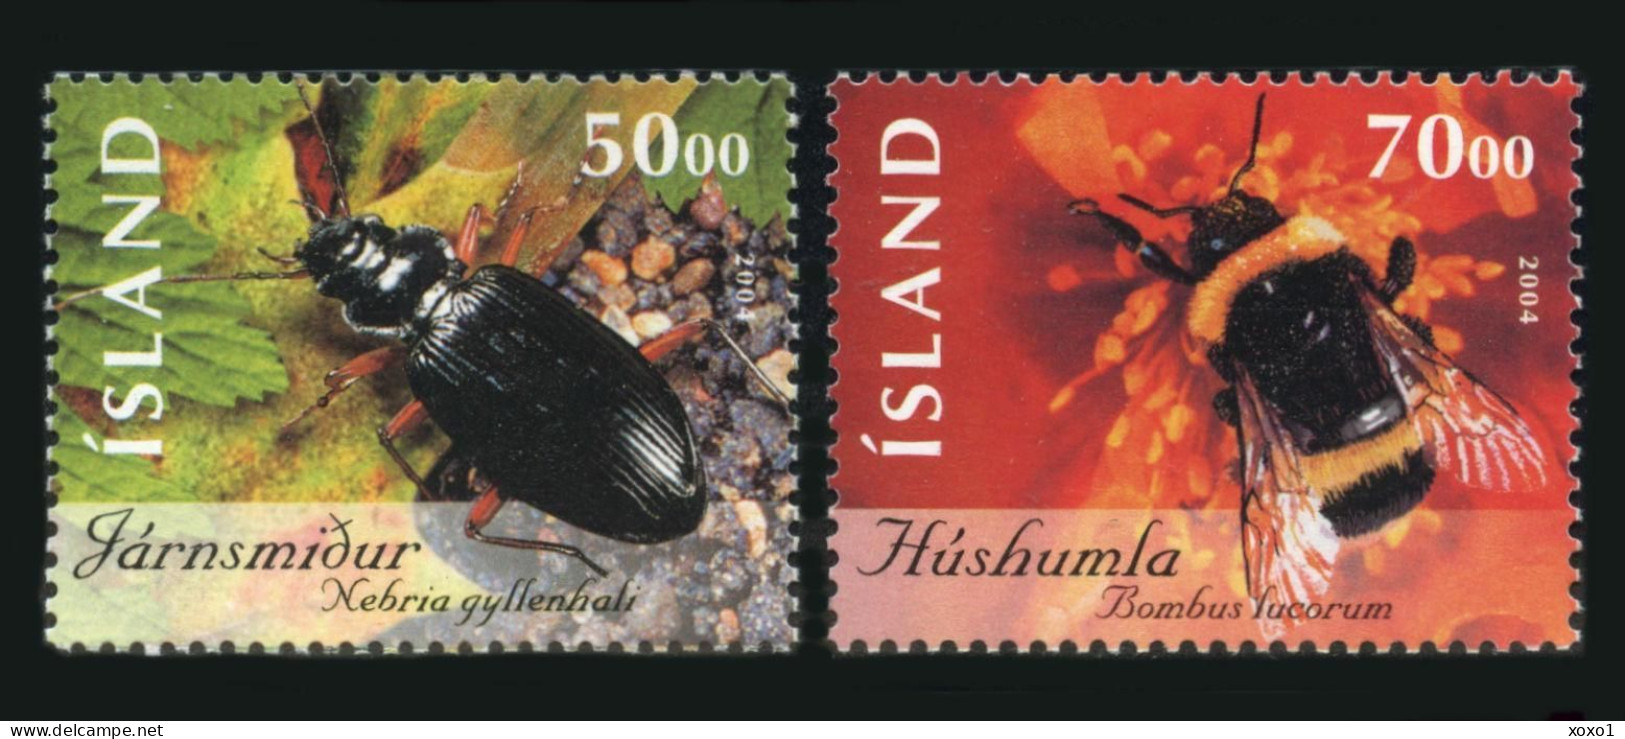 Iceland 2004 MiNr. 1075 - 1076 Island Insects And Spiders  # 1     2v  MNH** 3.50 € - Ungebraucht